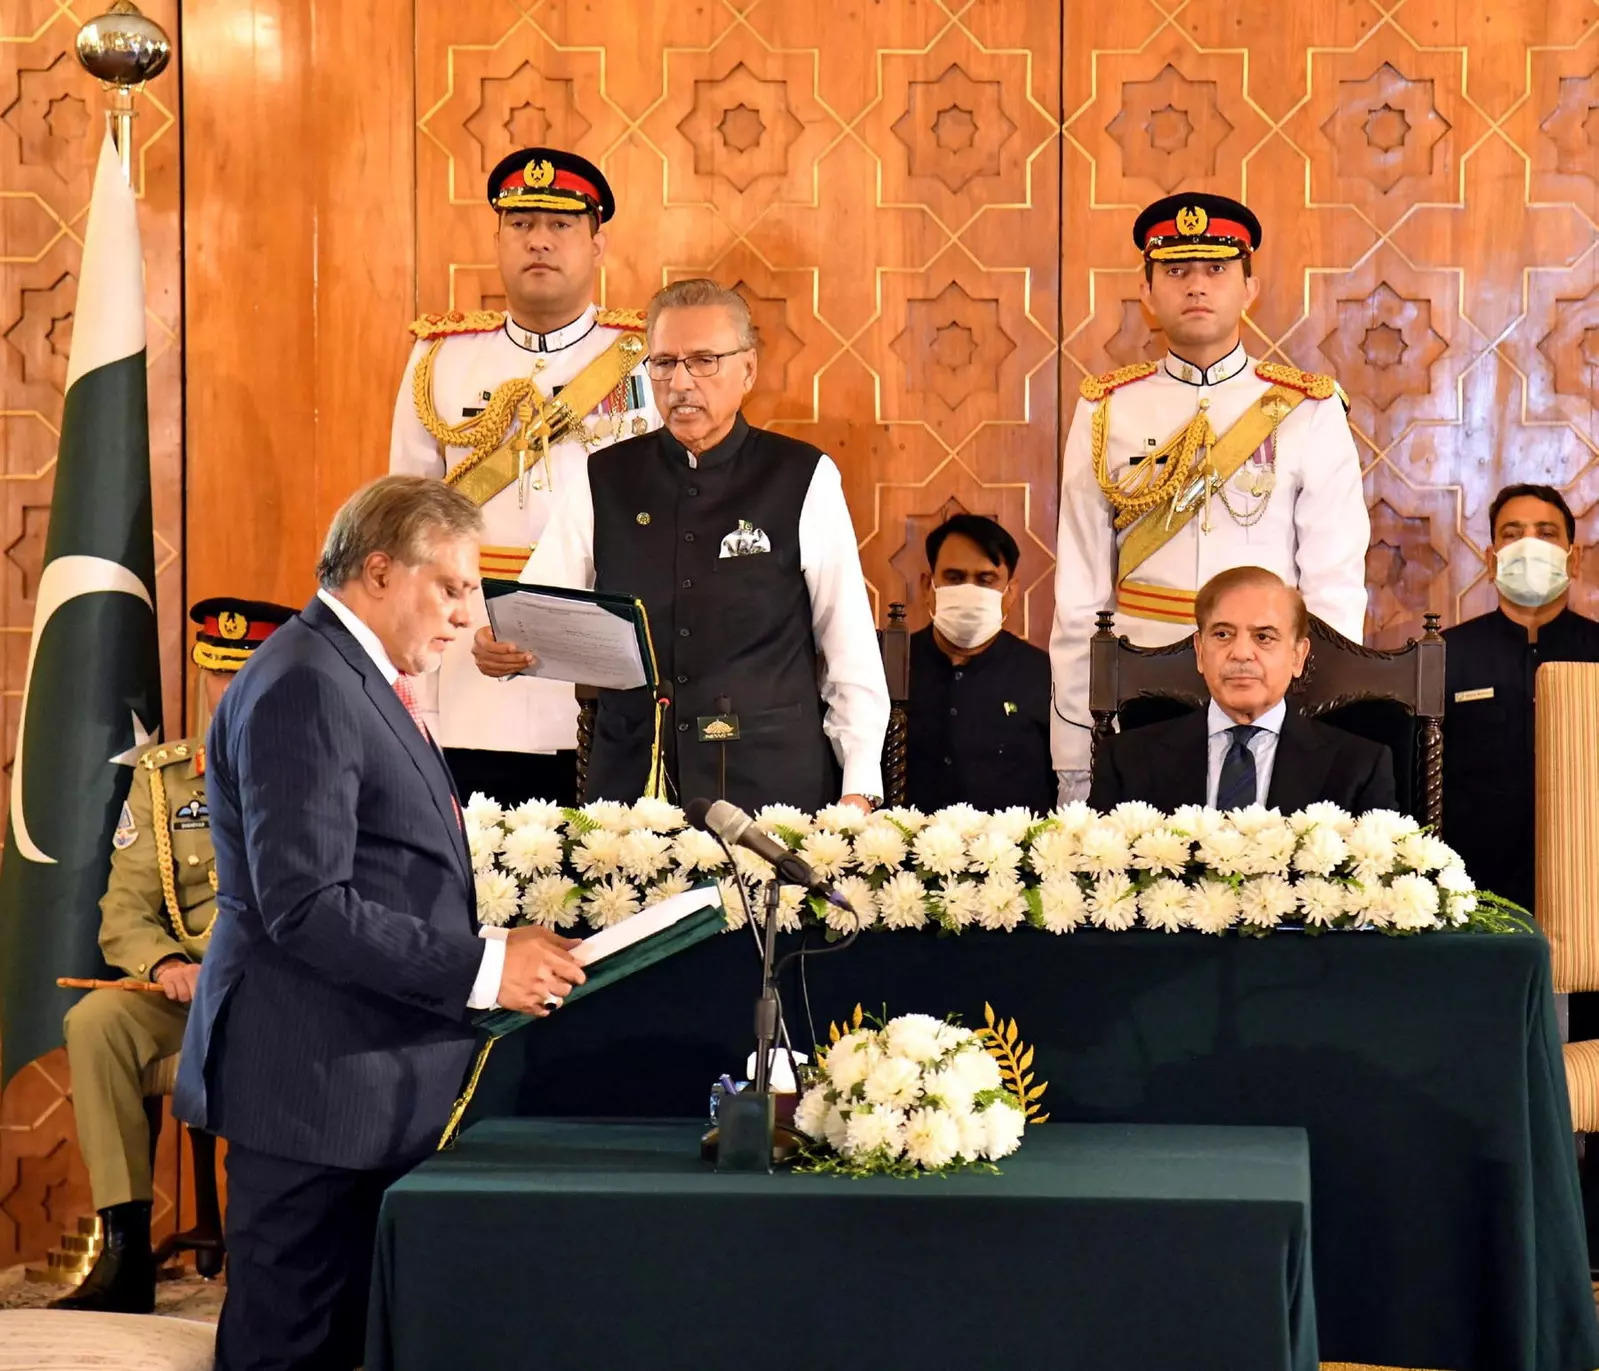 Pakistan's new finance minister Ishaq Dar takes oath in Islamabad. Pakistan, a country of around 220 million people with a $350 billion economy, has long struggled with its external accounts, and the IMF has bailed it out over 20 times since 1958.